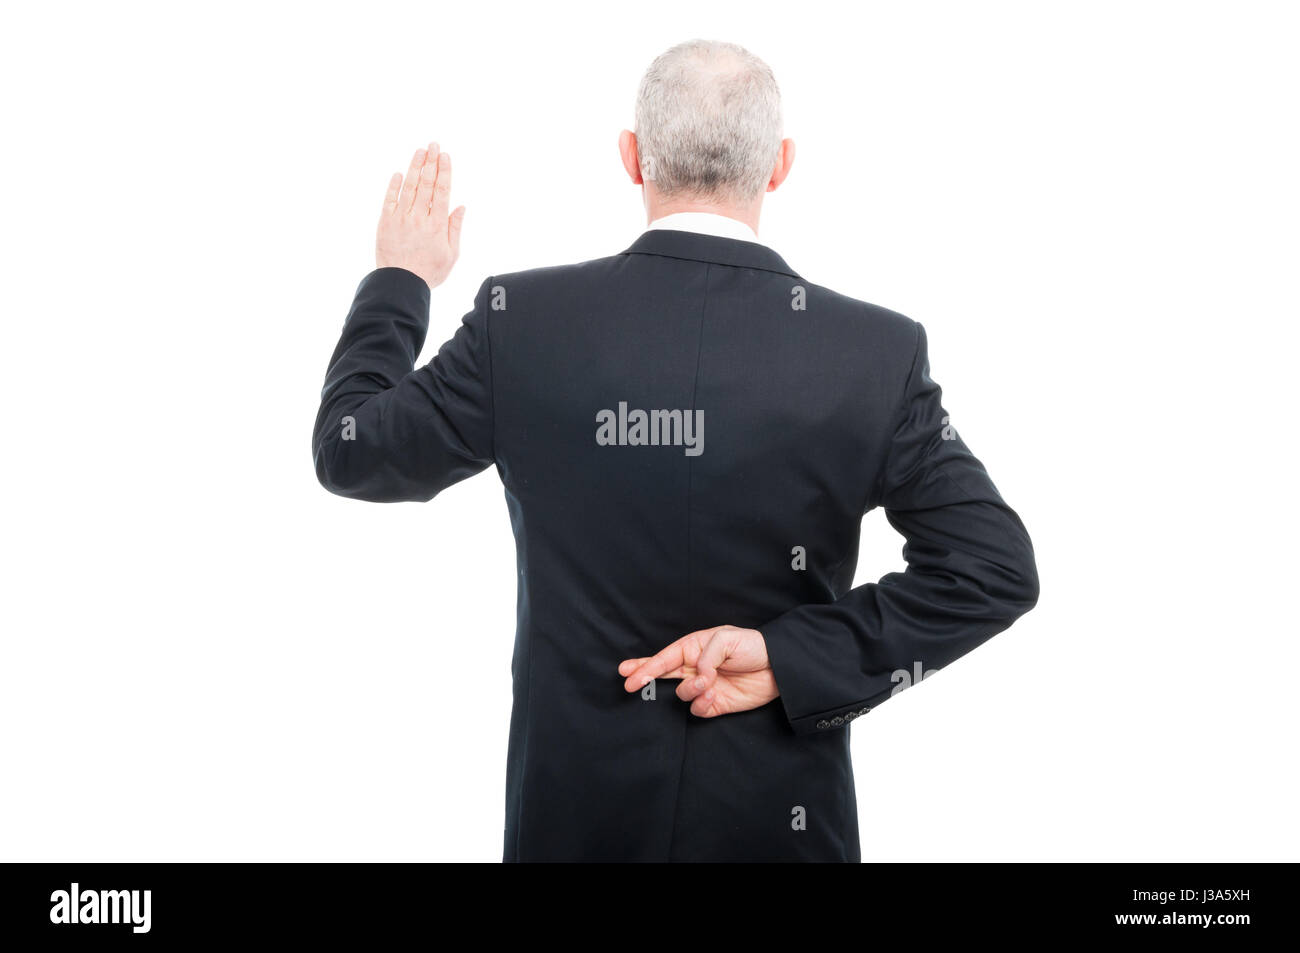 Back view aged elegant man making fake oath gesture wearing suit isolated on white background with copy text space Stock Photo